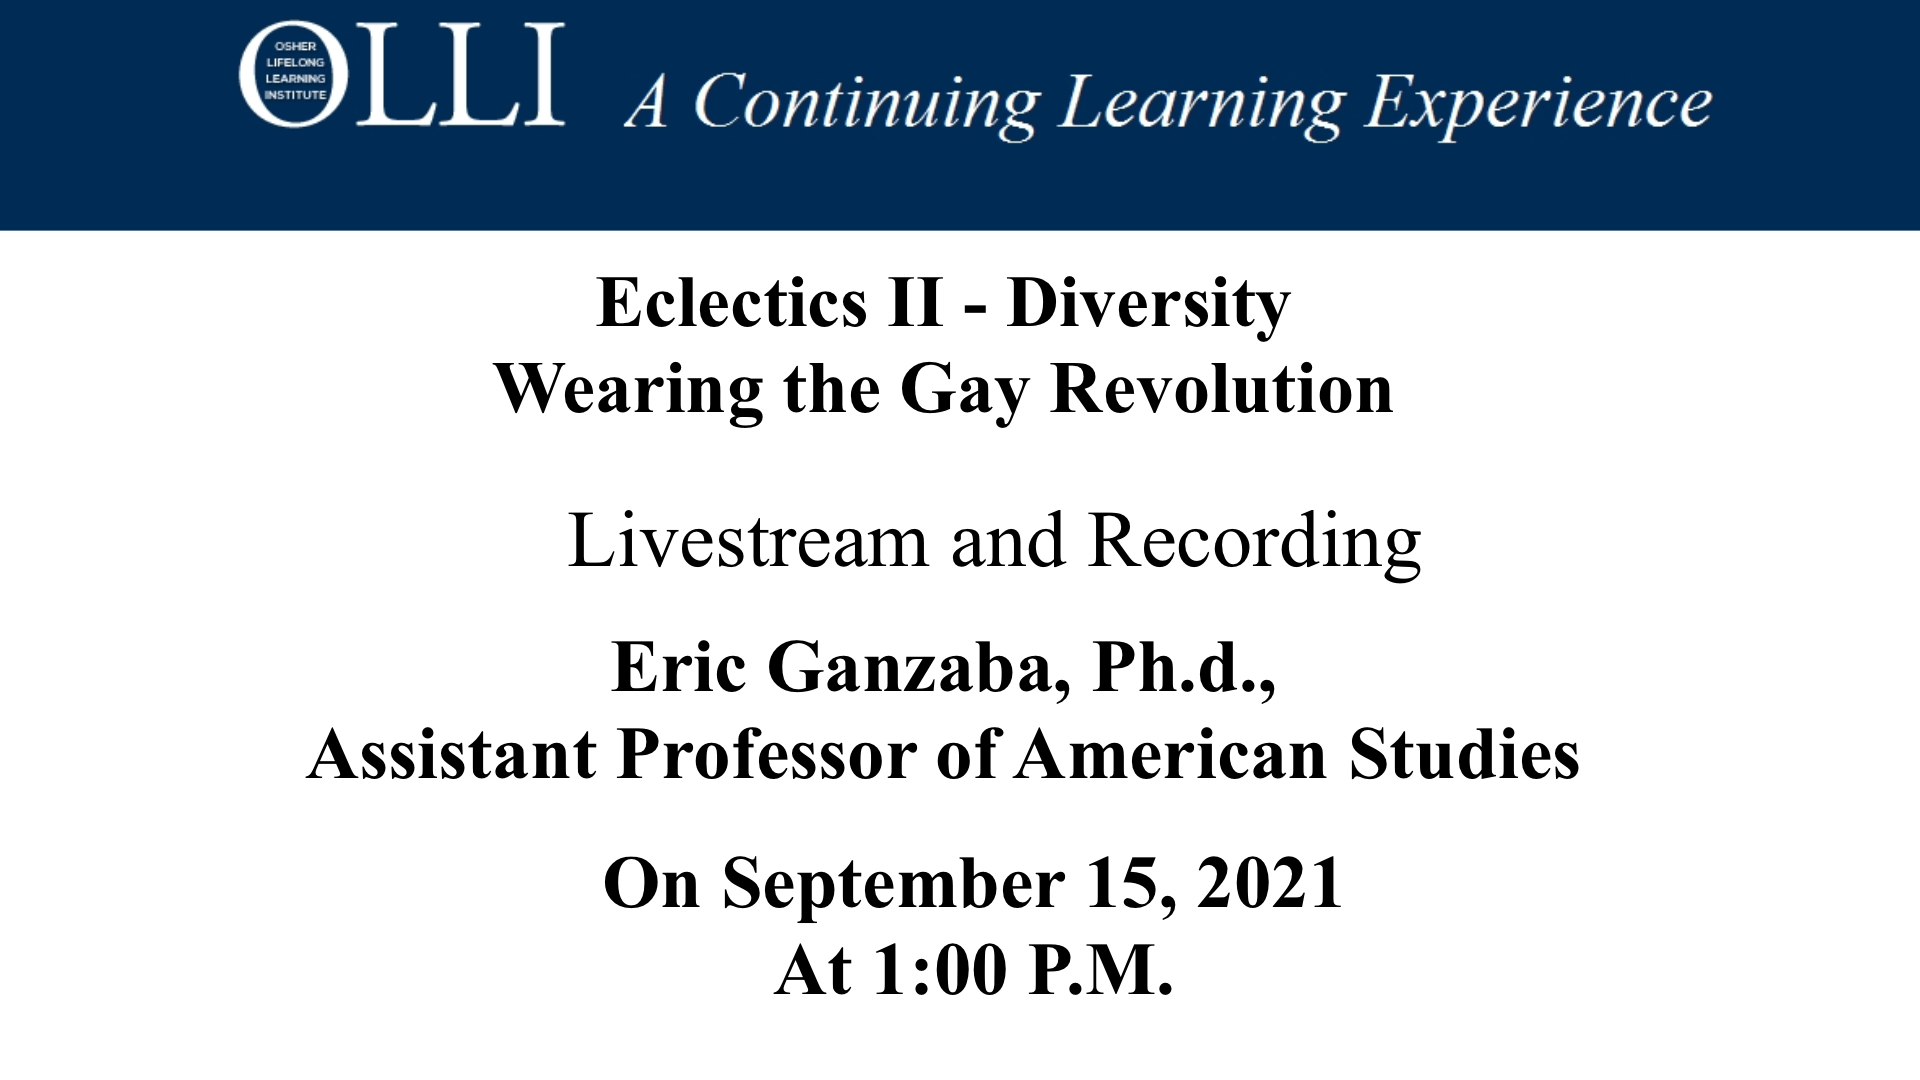 Click here to view livestream on Eclectics II - Diversity